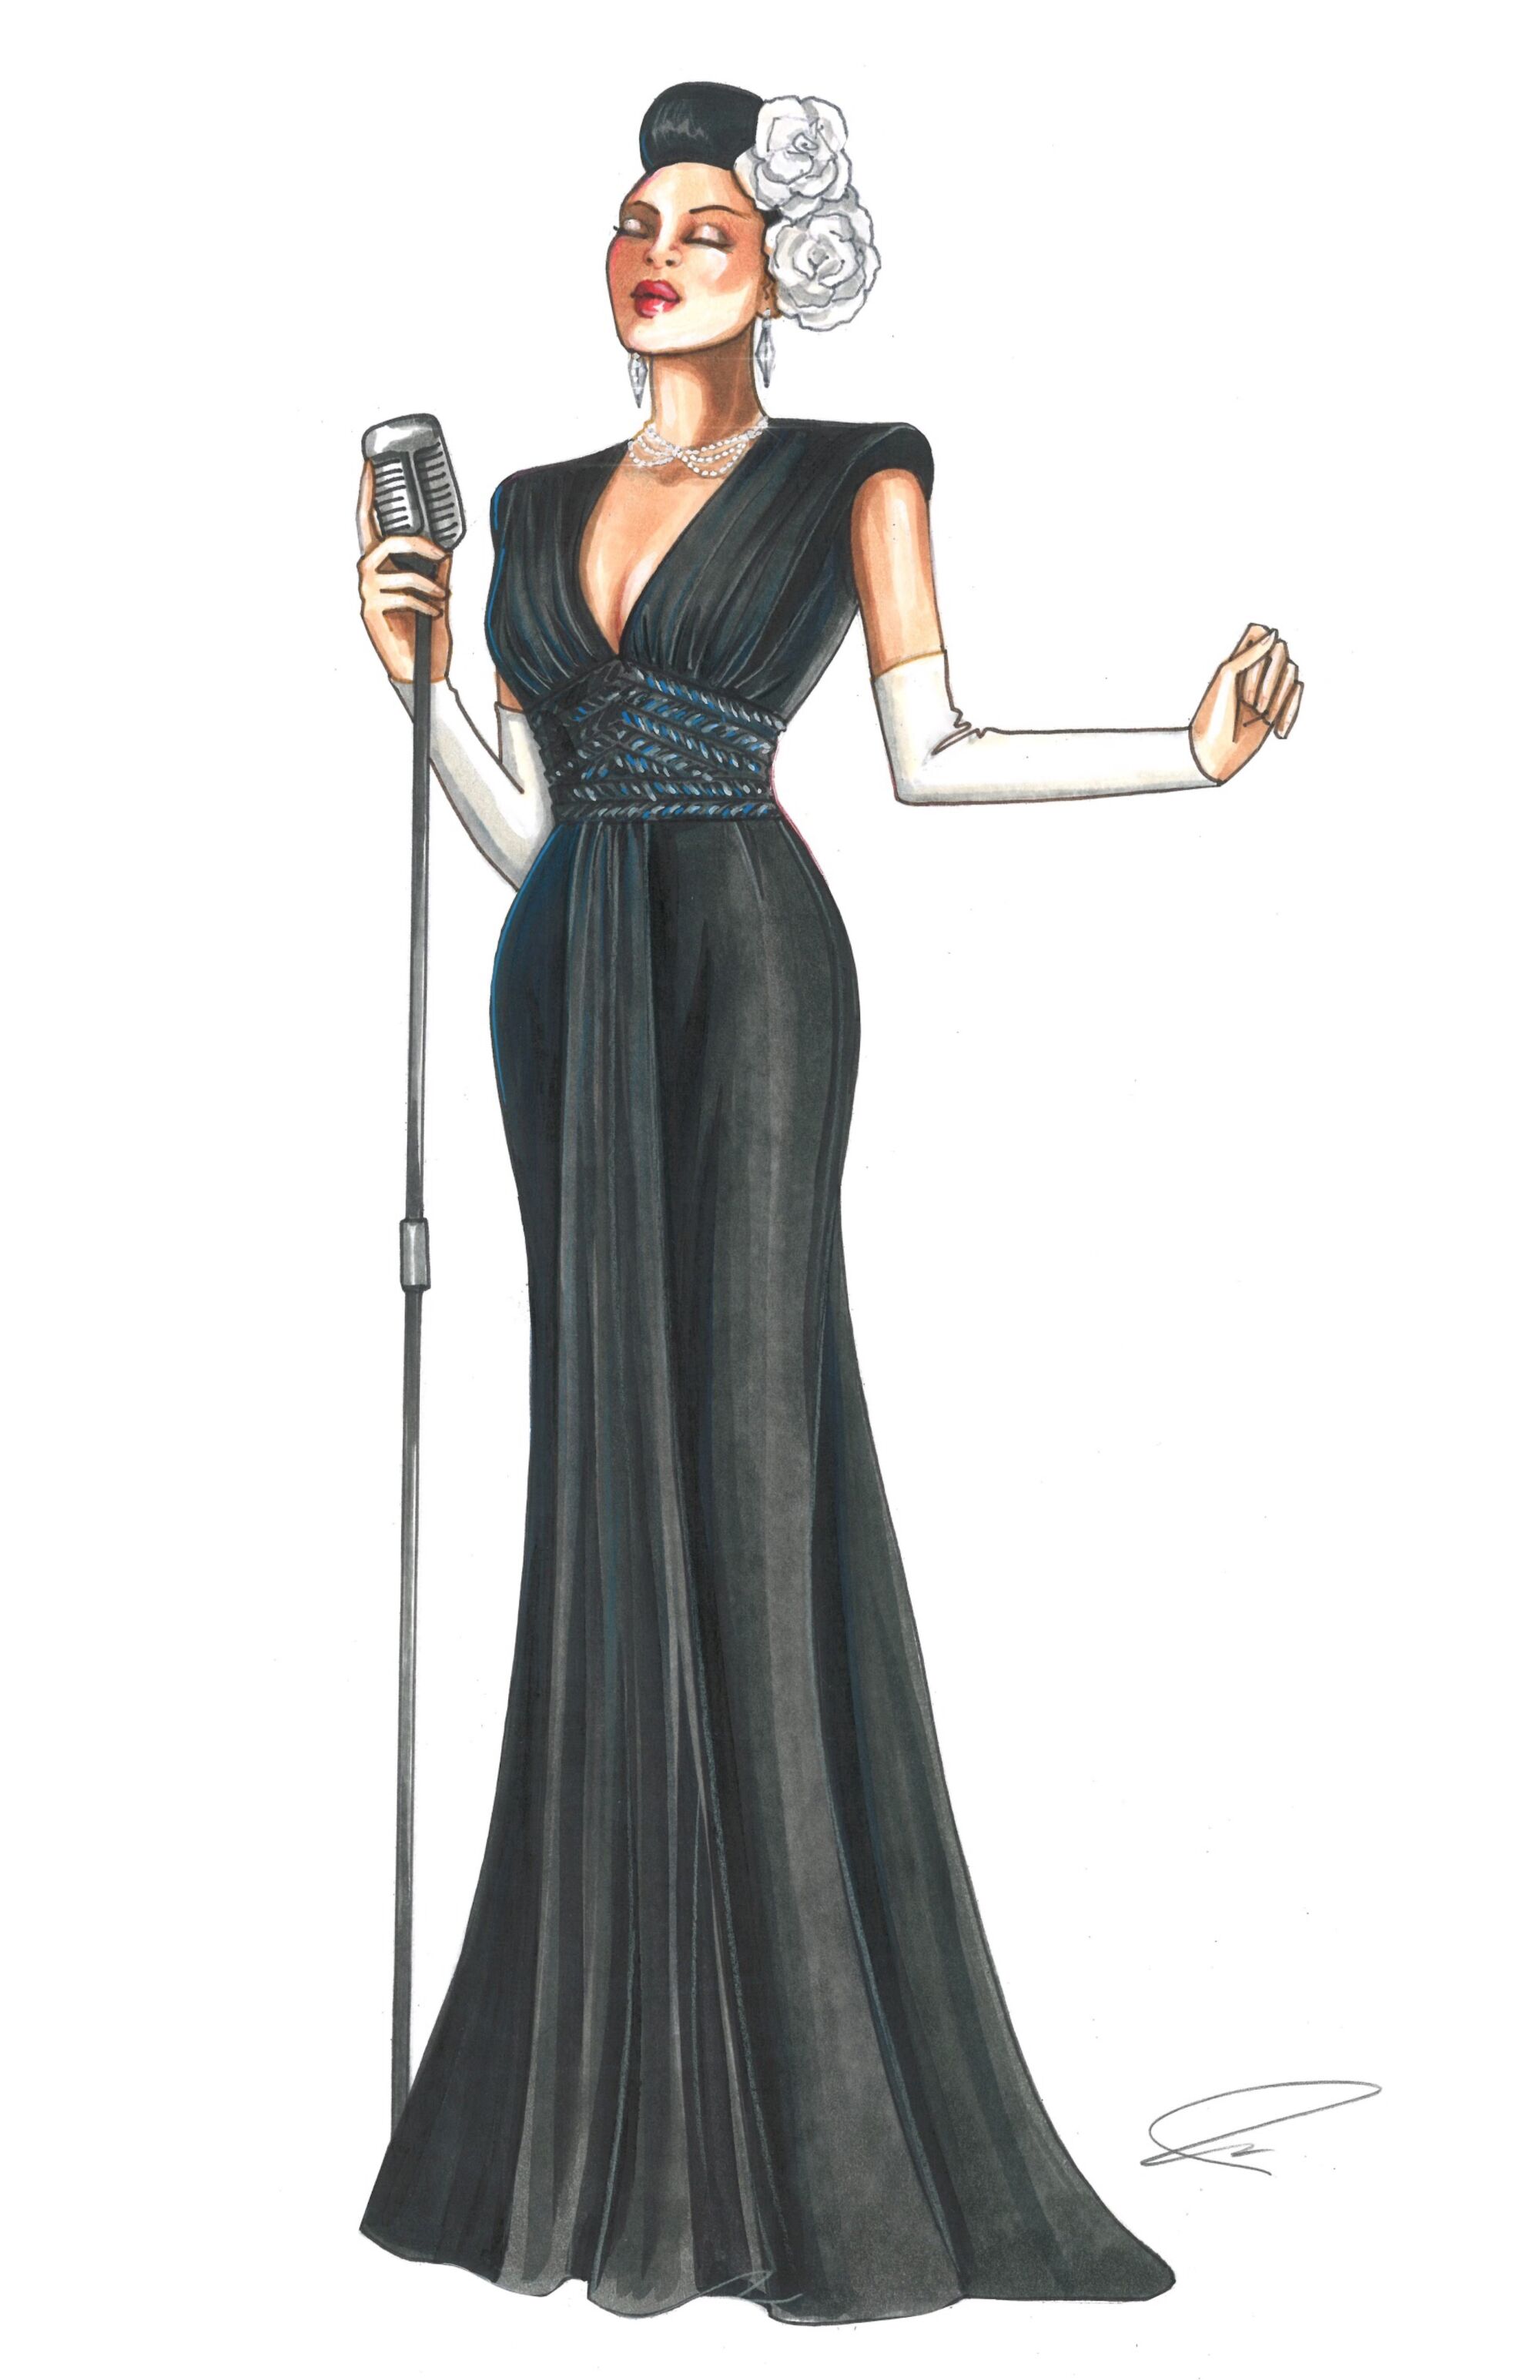 Carnegie Hall costume sketch by Paolo Nieddu for "The United States vs. Billie Holiday."